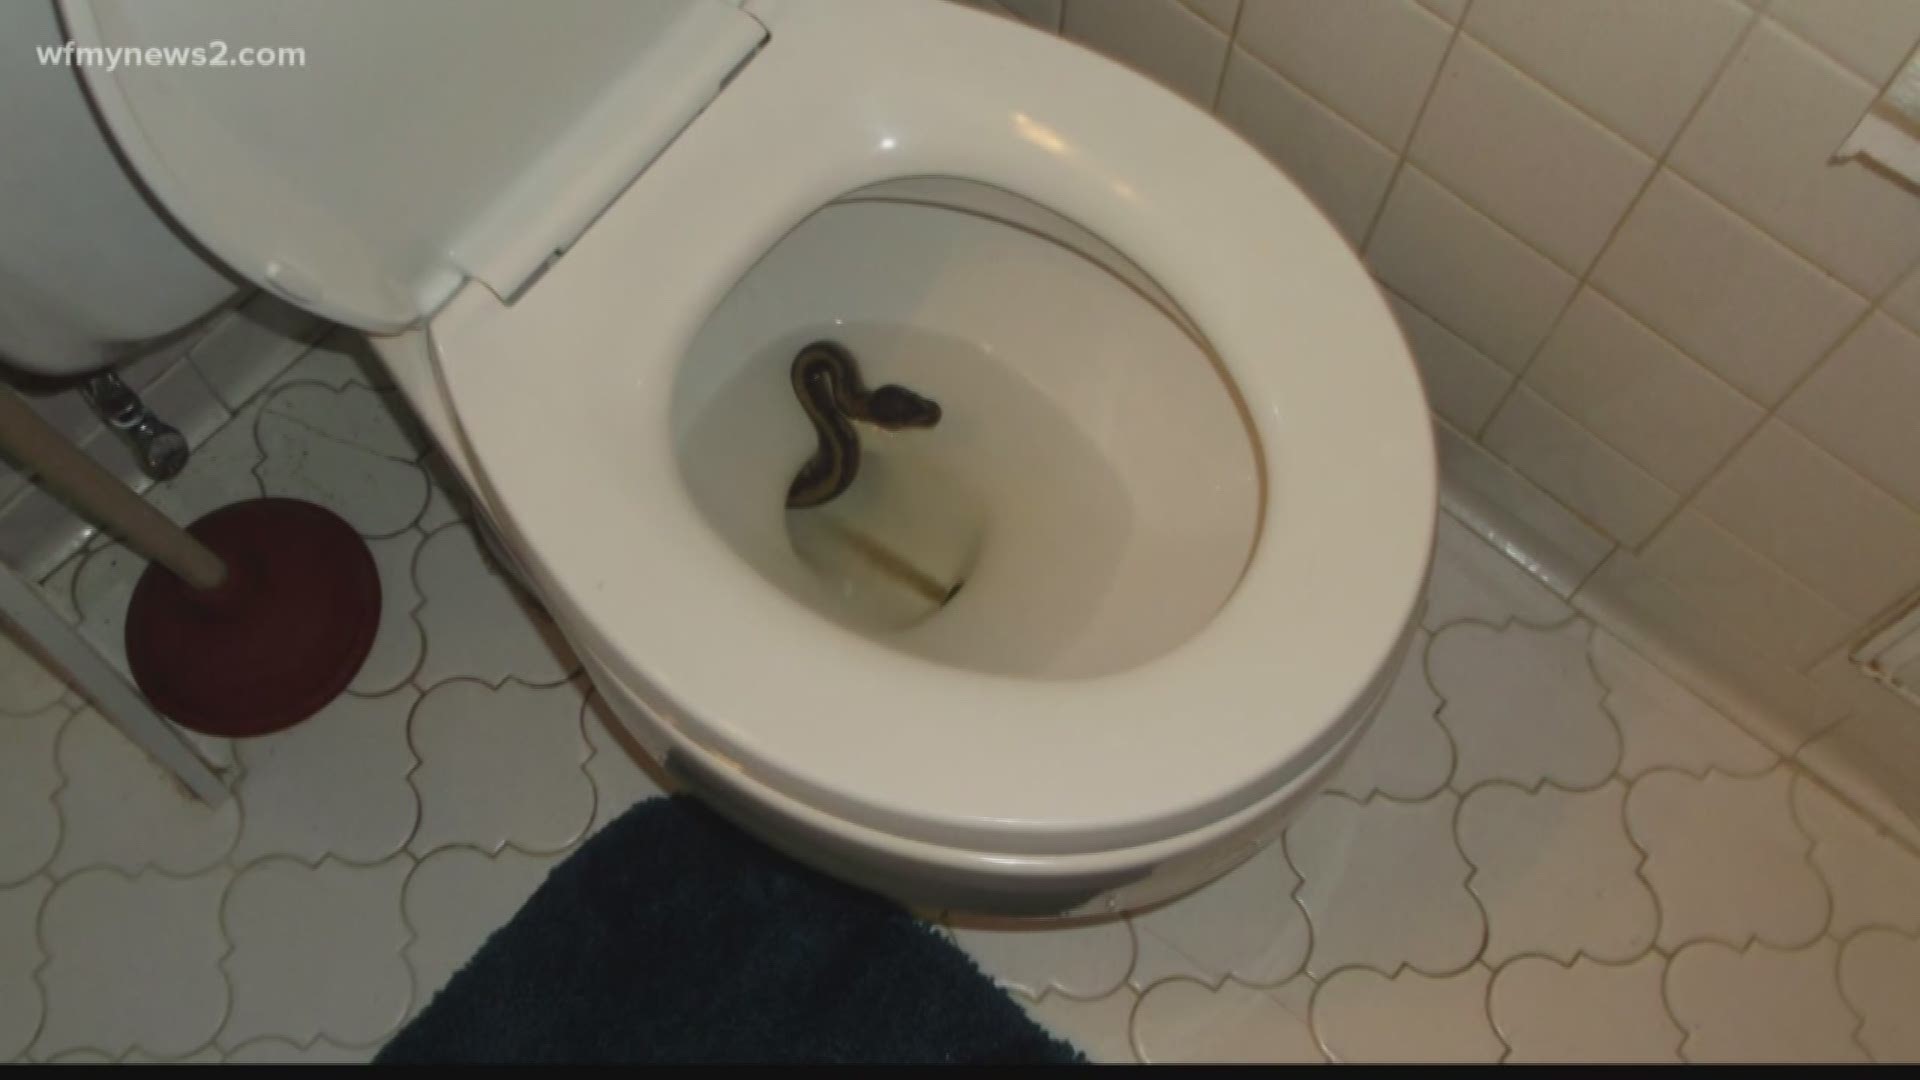 6 Effective ways to prevent snakes from entering your toilet in this dry  season